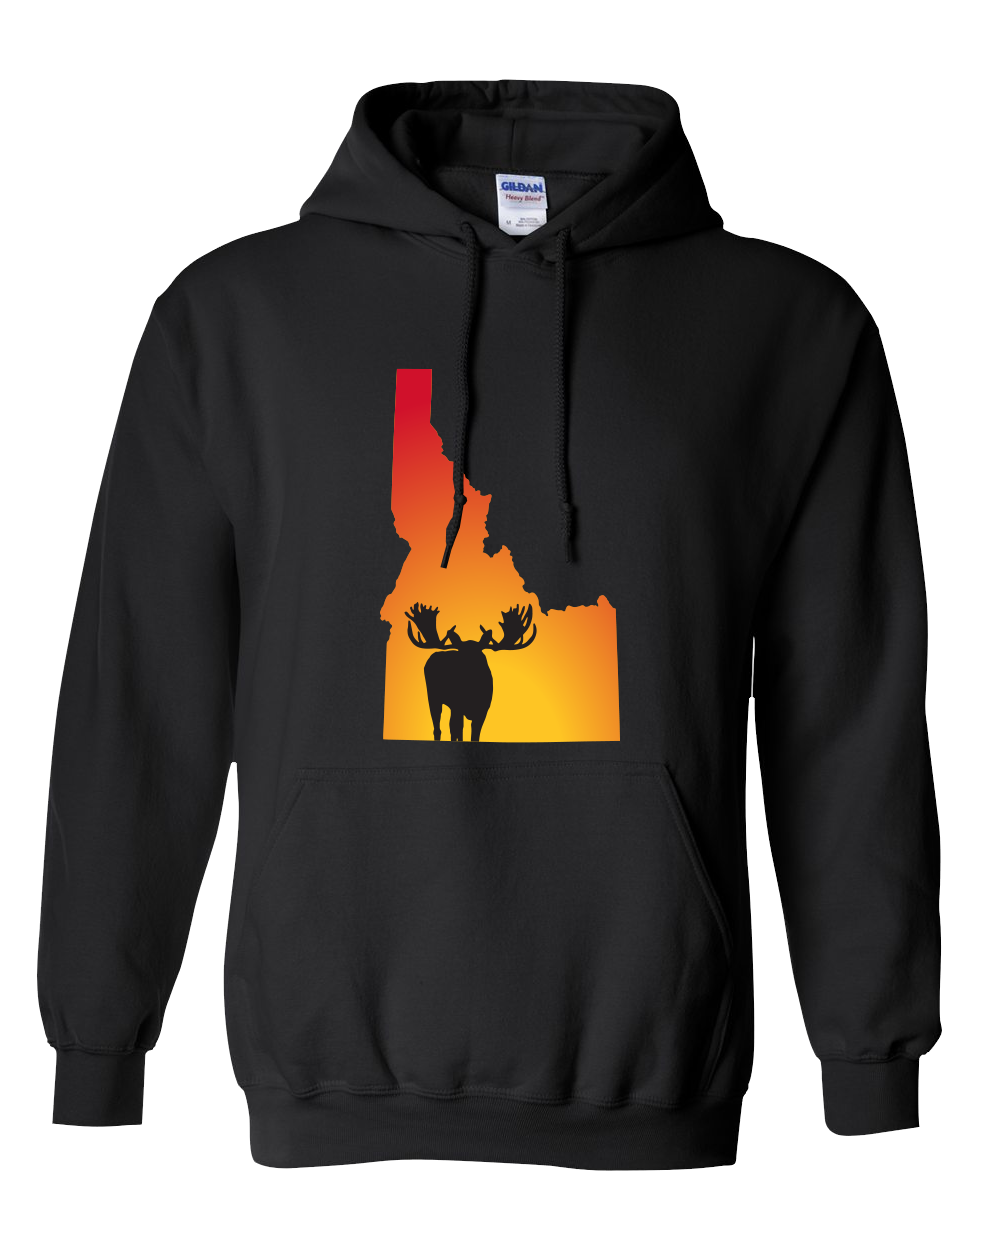 Pullover Hooded Sweatshirt Idaho Black Moose Vibrant Design High Quality Tight Knit Ring Spun Low Maintenance Cotton Printed With The Newest Available Color Transfer Technology